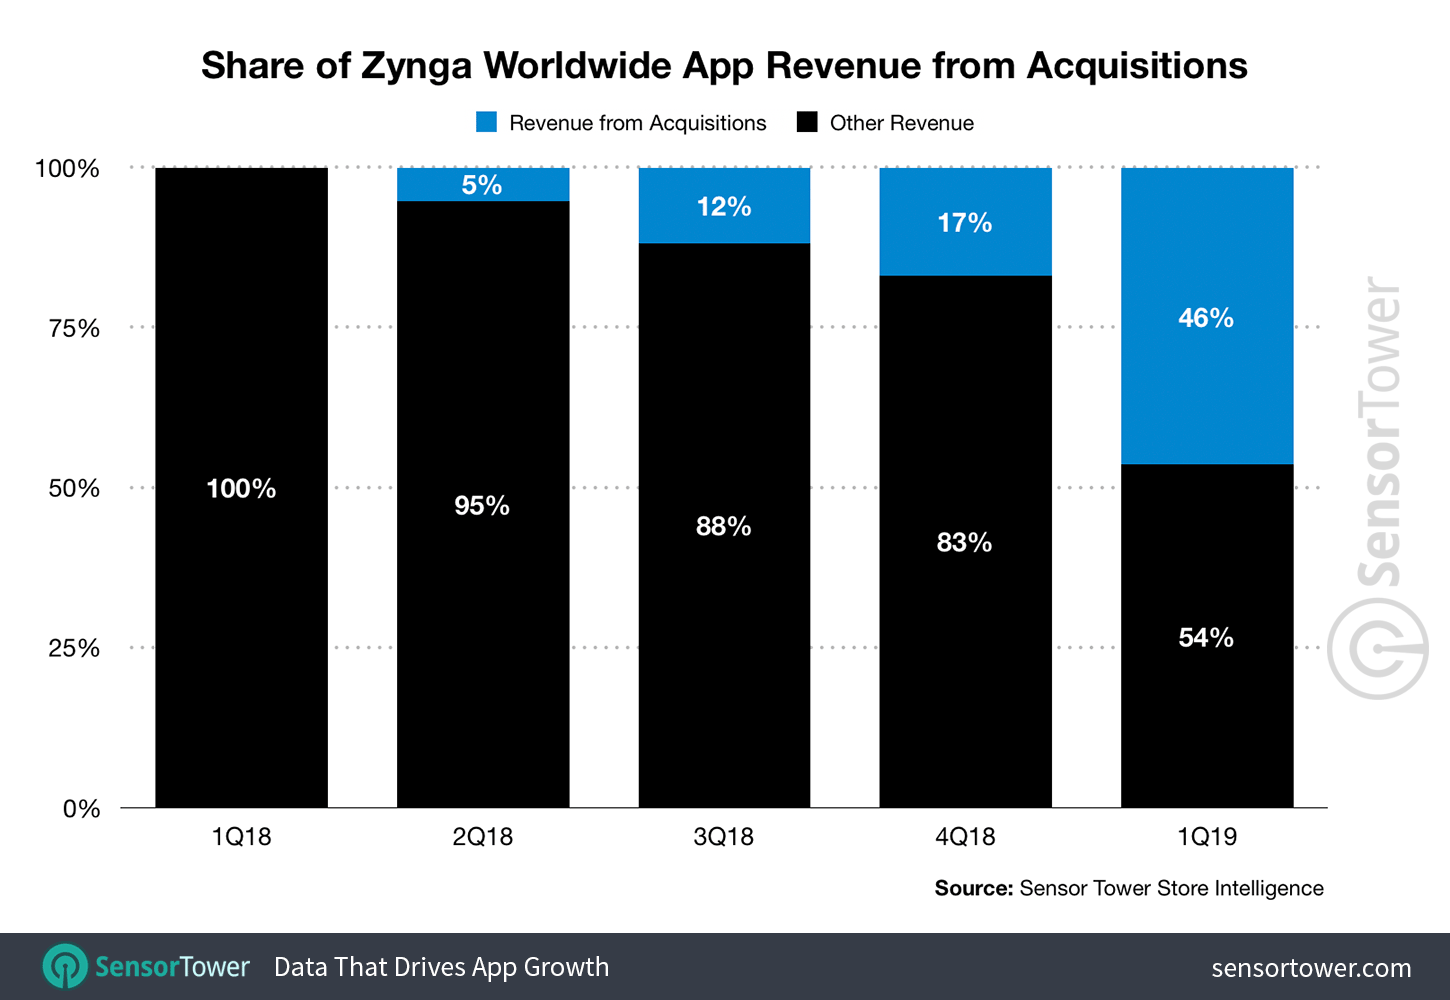 Zynga Share of Revenue from Acquired Games by Quarter